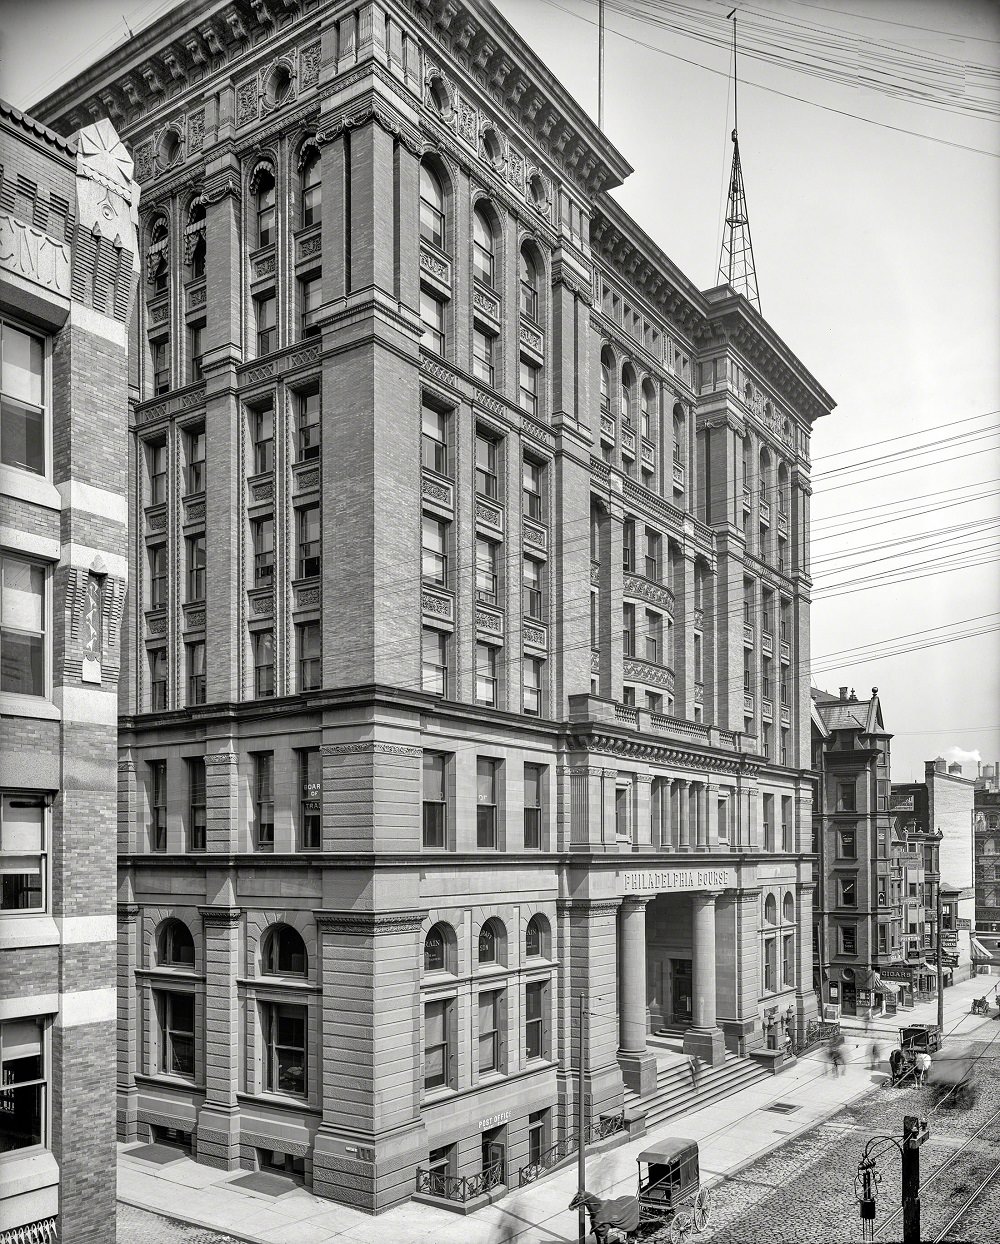 The Philadelphia Bourse, Fourth and Ranstead streets, 1904